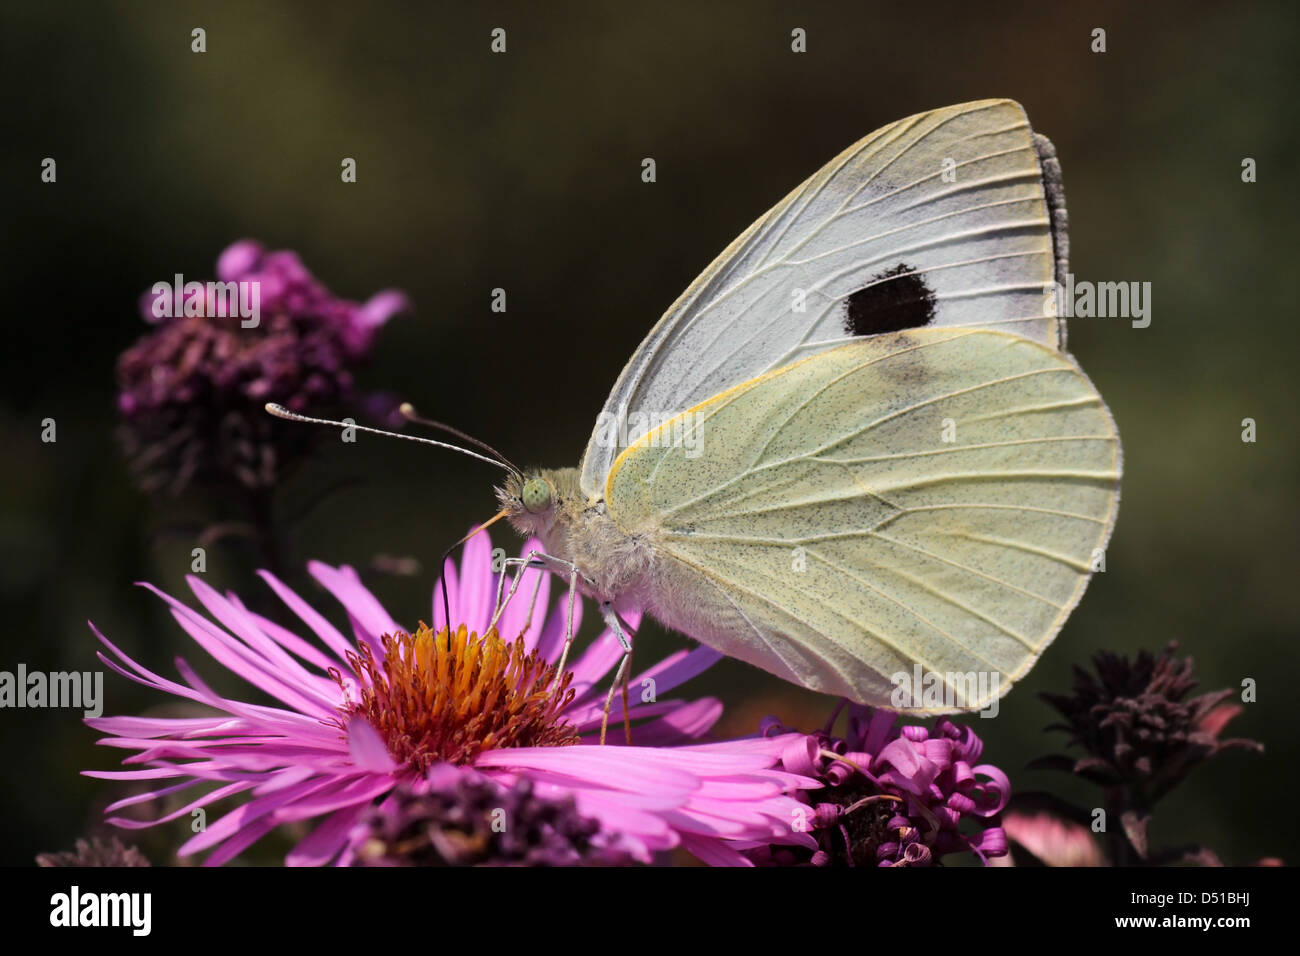 Chou blanc butterfly sitting on flower Banque D'Images